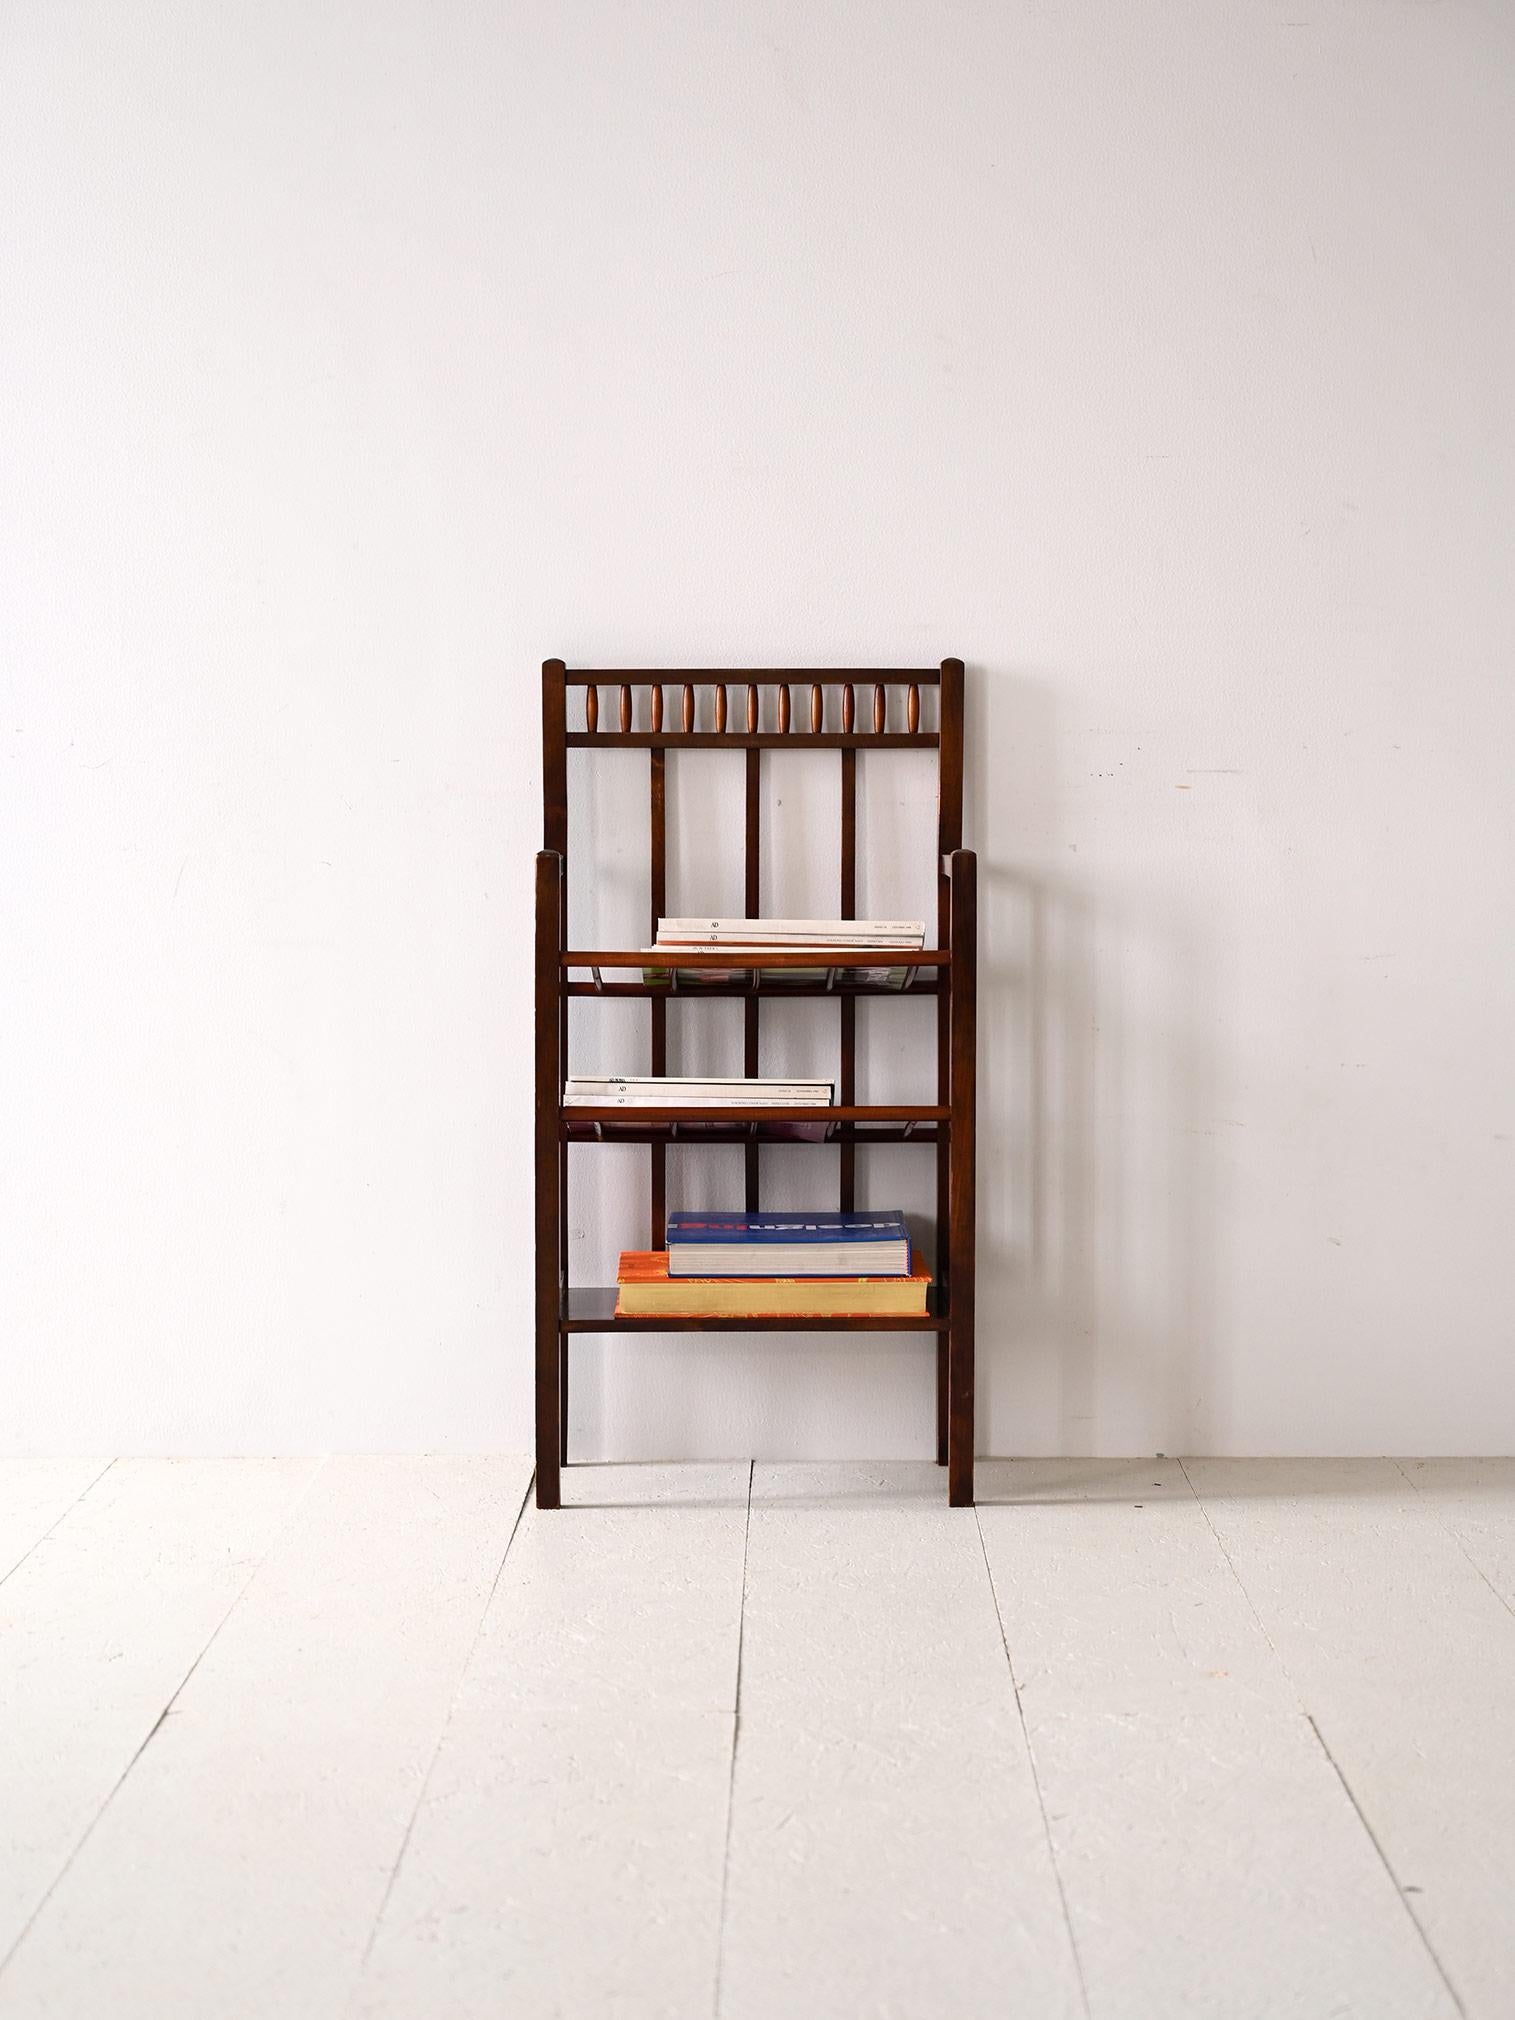 Wooden magazine rack designed in the 1940s Art Deco period.

Consists of a structure with regular lines and three wooden shelves.
Ideal as a magazine rack or bedside table for the bedroom.
The retro-flavored design will warm the room in perfect